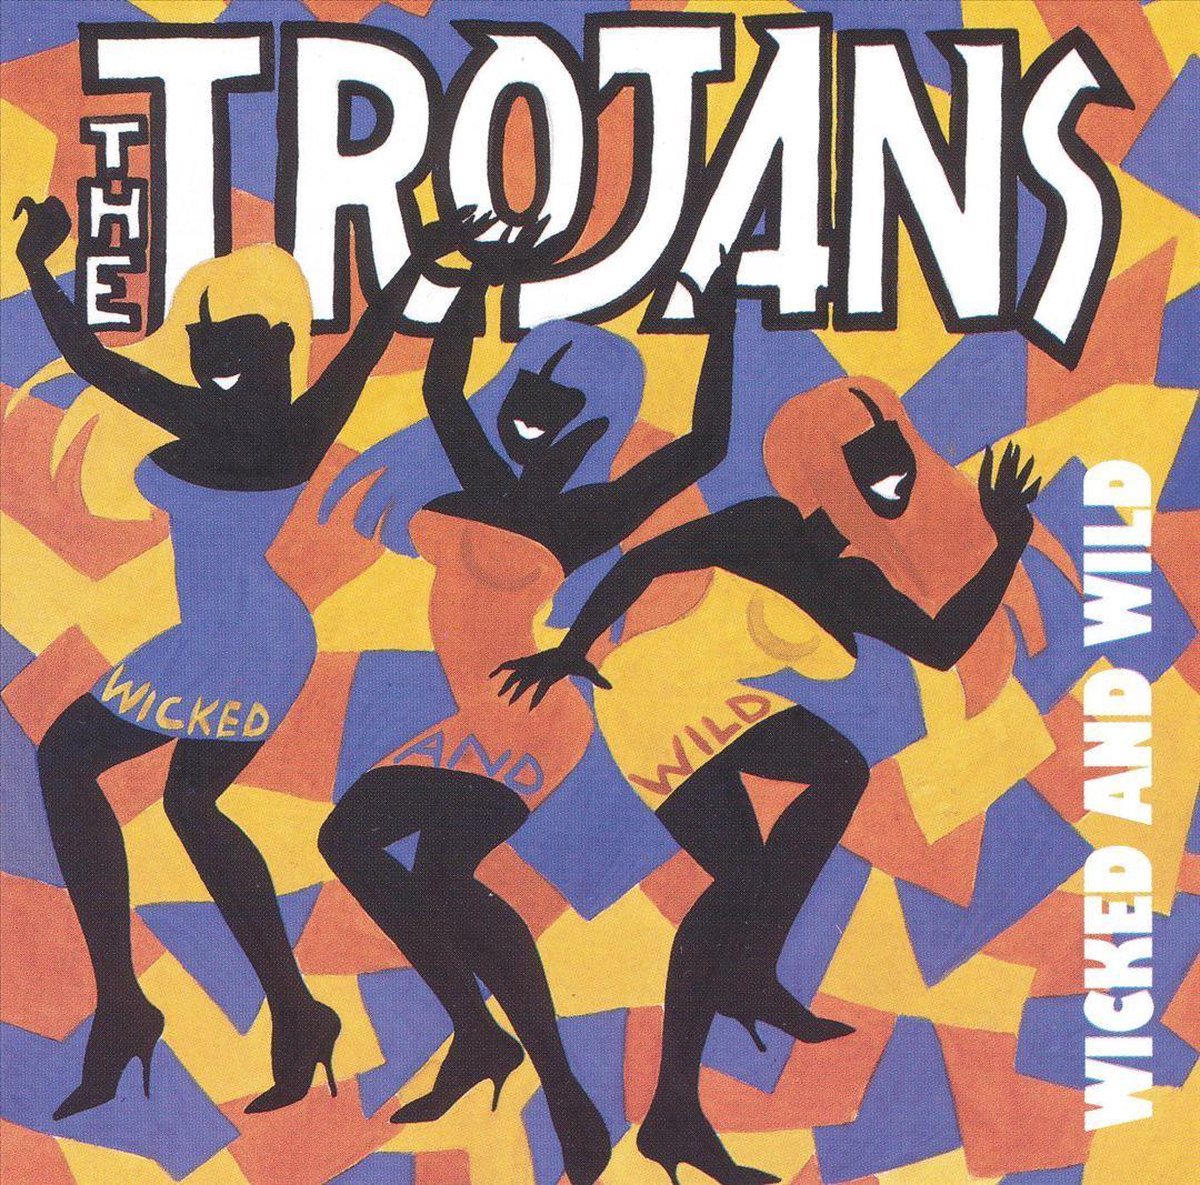 Wicked And Wild - The Trojans